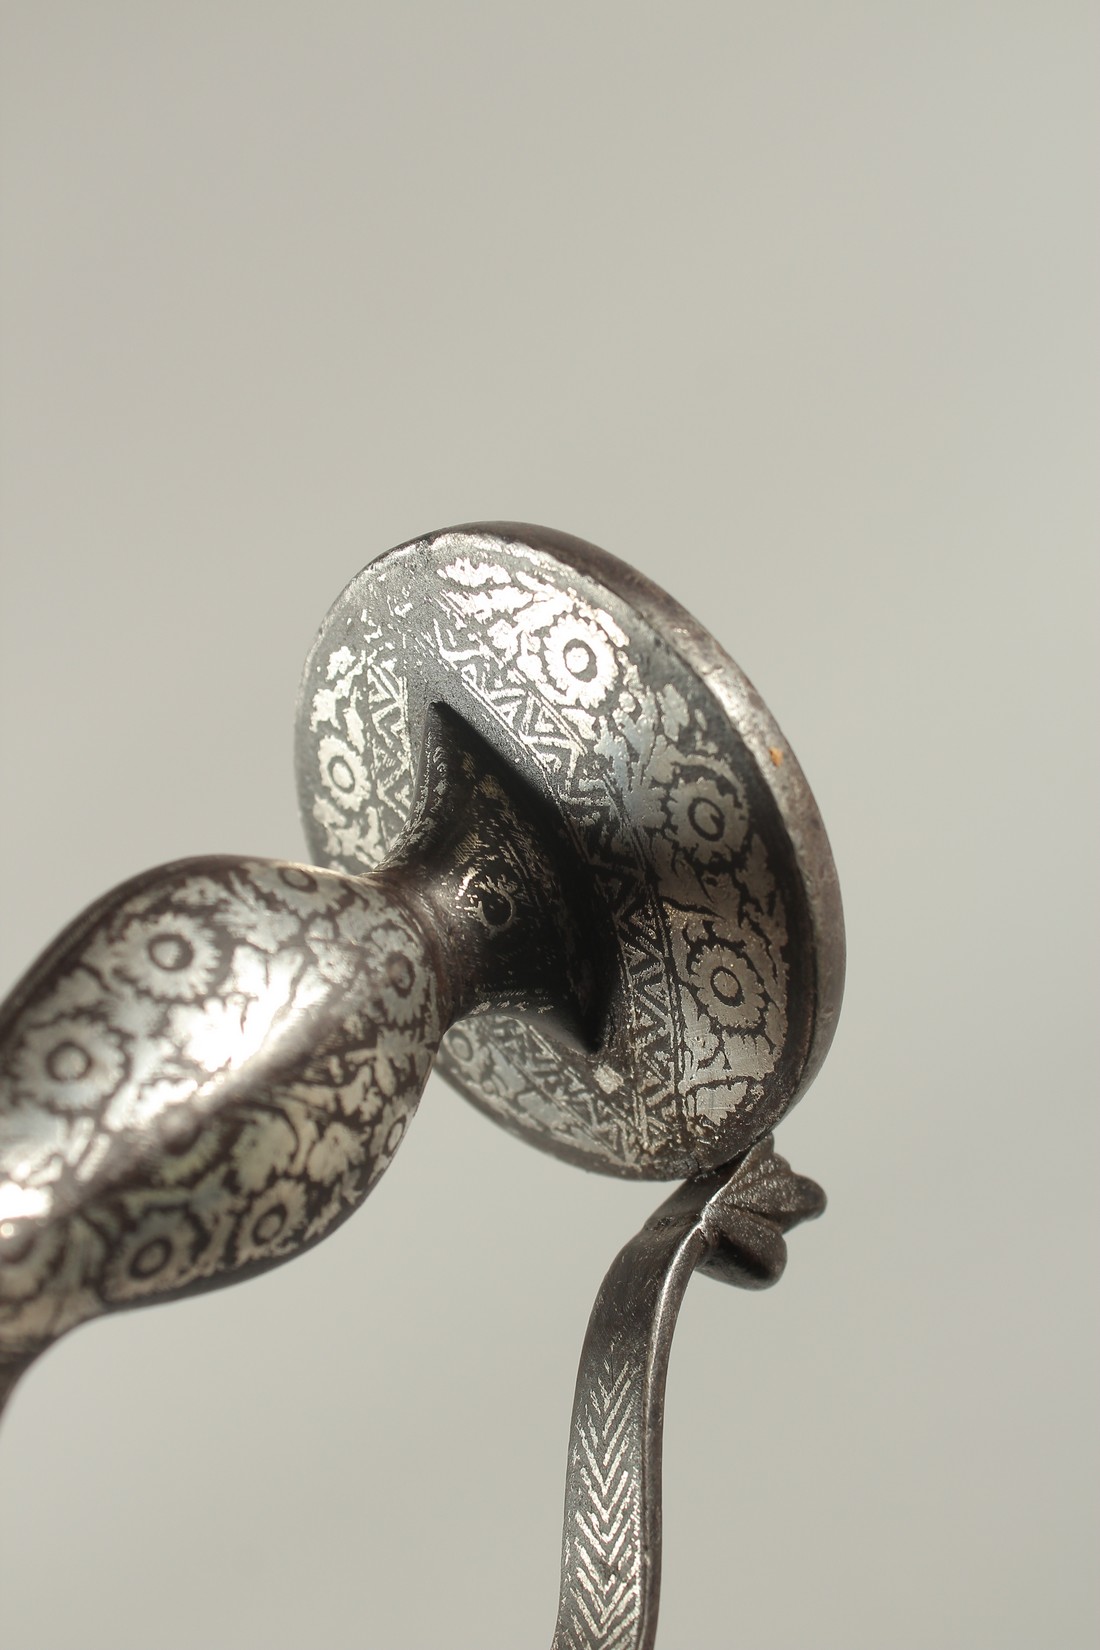 AN 18TH CENTURY MUGHAL INDIAN TULWAR SWORD, with silver inlaid hilt and signed blade. - Image 7 of 8